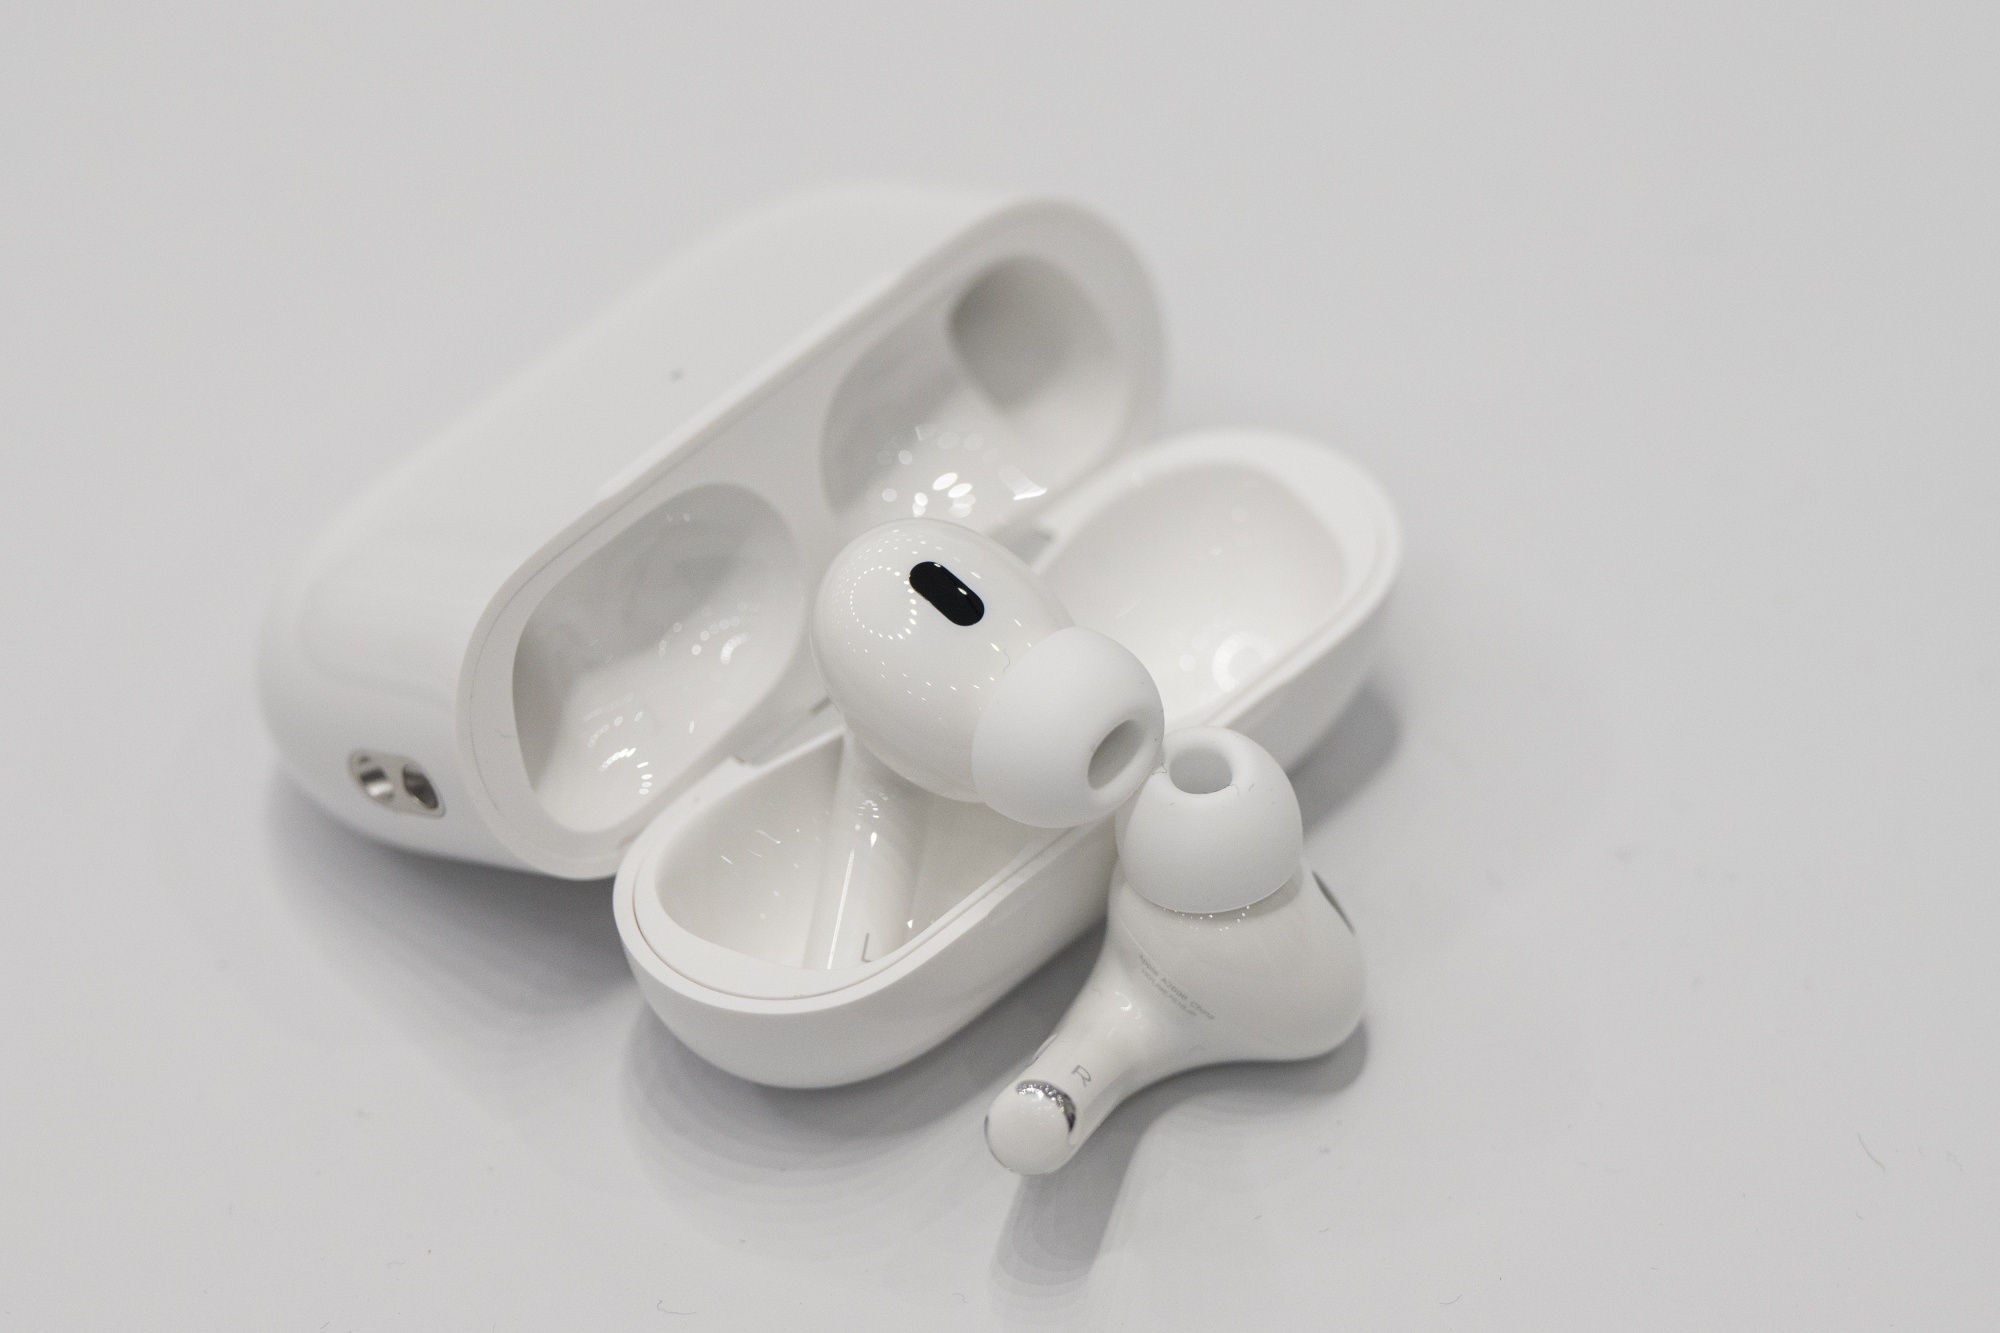 Apple AirPods Plans: Test, Temperature, Cheaper USB-C Bloomberg